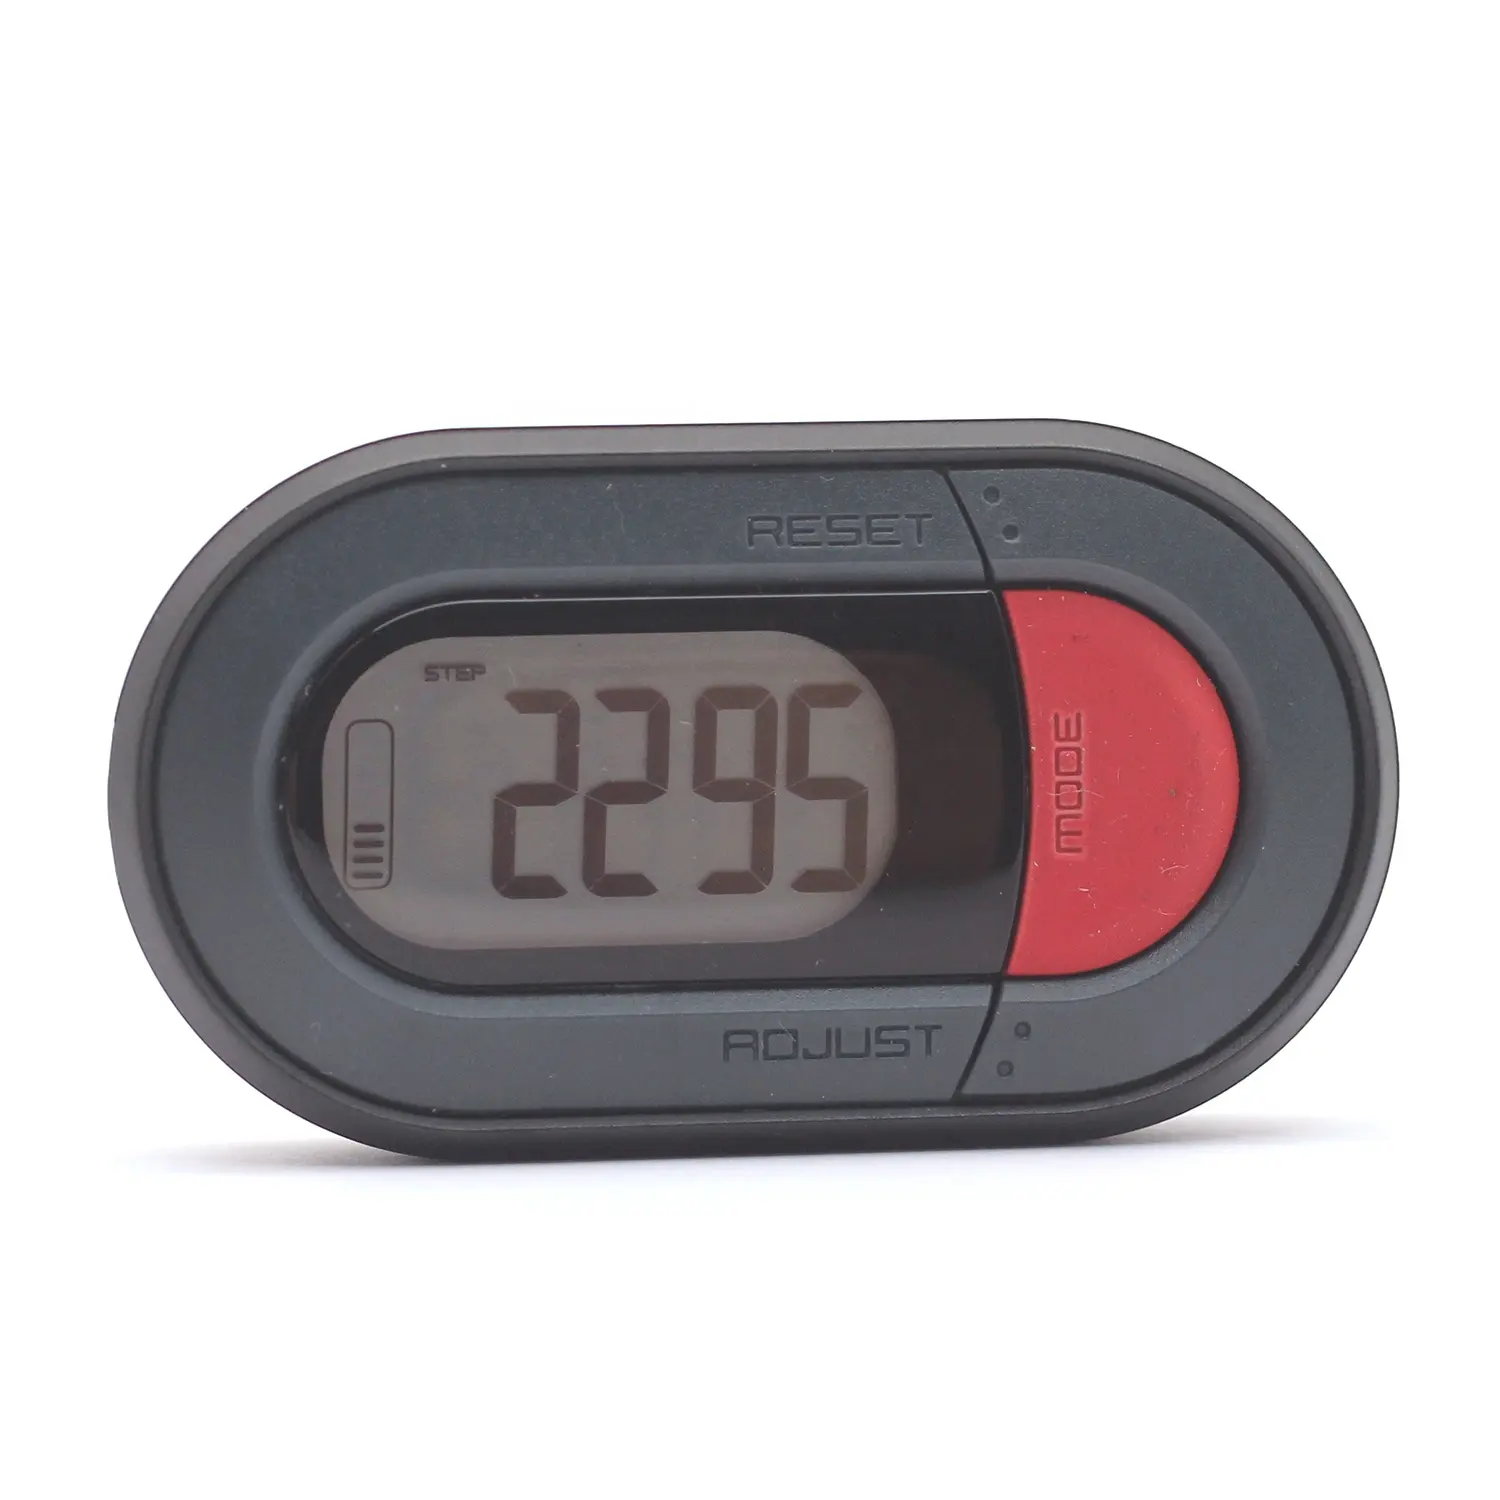 Accurate 3D Sensor Easy Clip On Big Display Pedometer Step Counter Walking Distance Calorie Exercise Fat Burned Timer